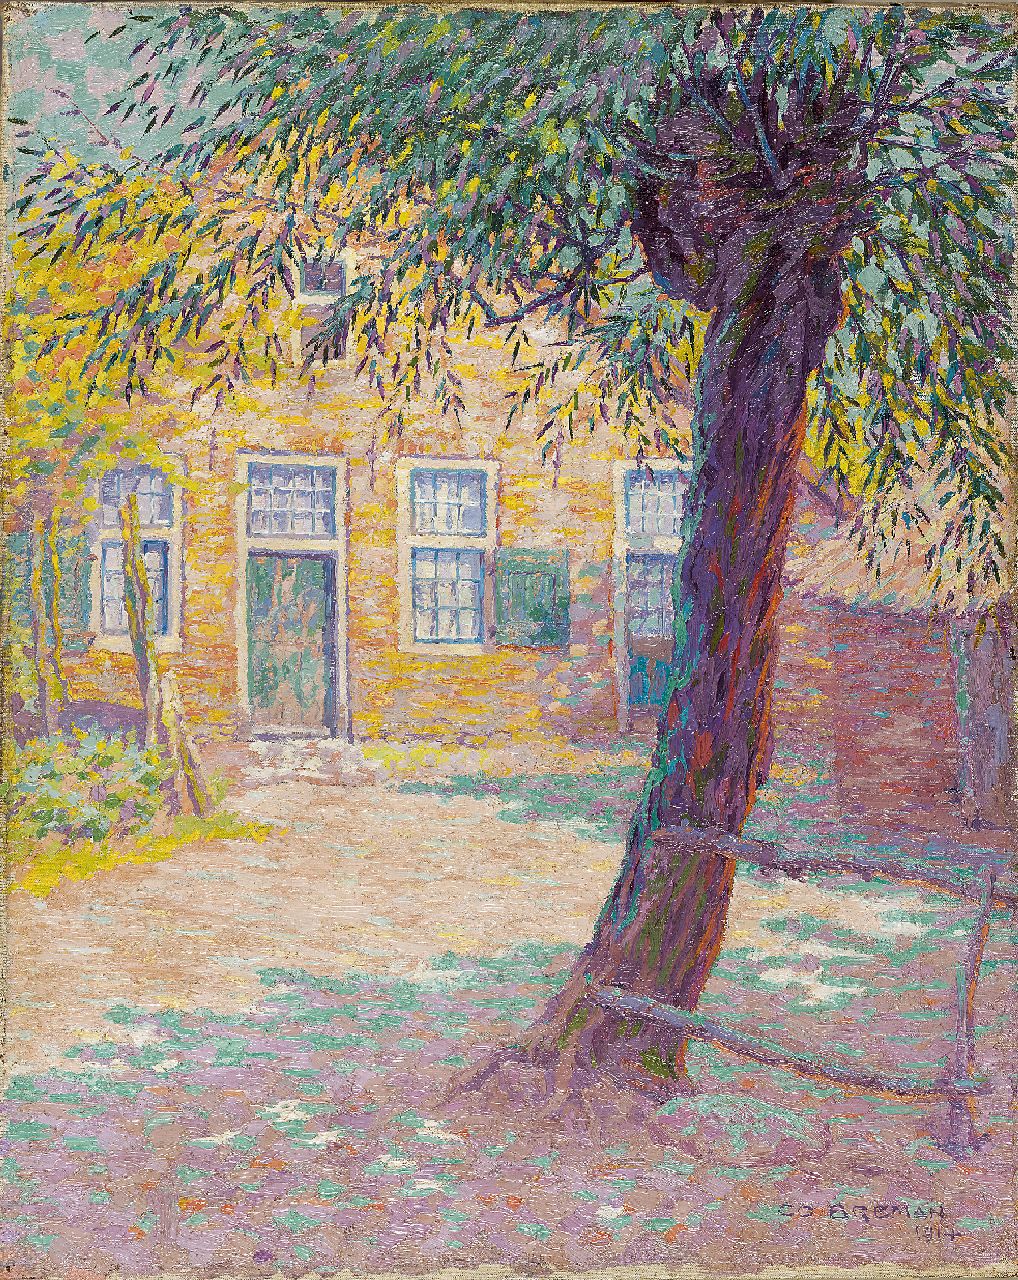 Breman A.J.  | Ahazueros Jacobus 'Co' Breman, House in the sun, Laren, oil on canvas 56.4 x 45.1 cm, signed l.r. and dated 1914